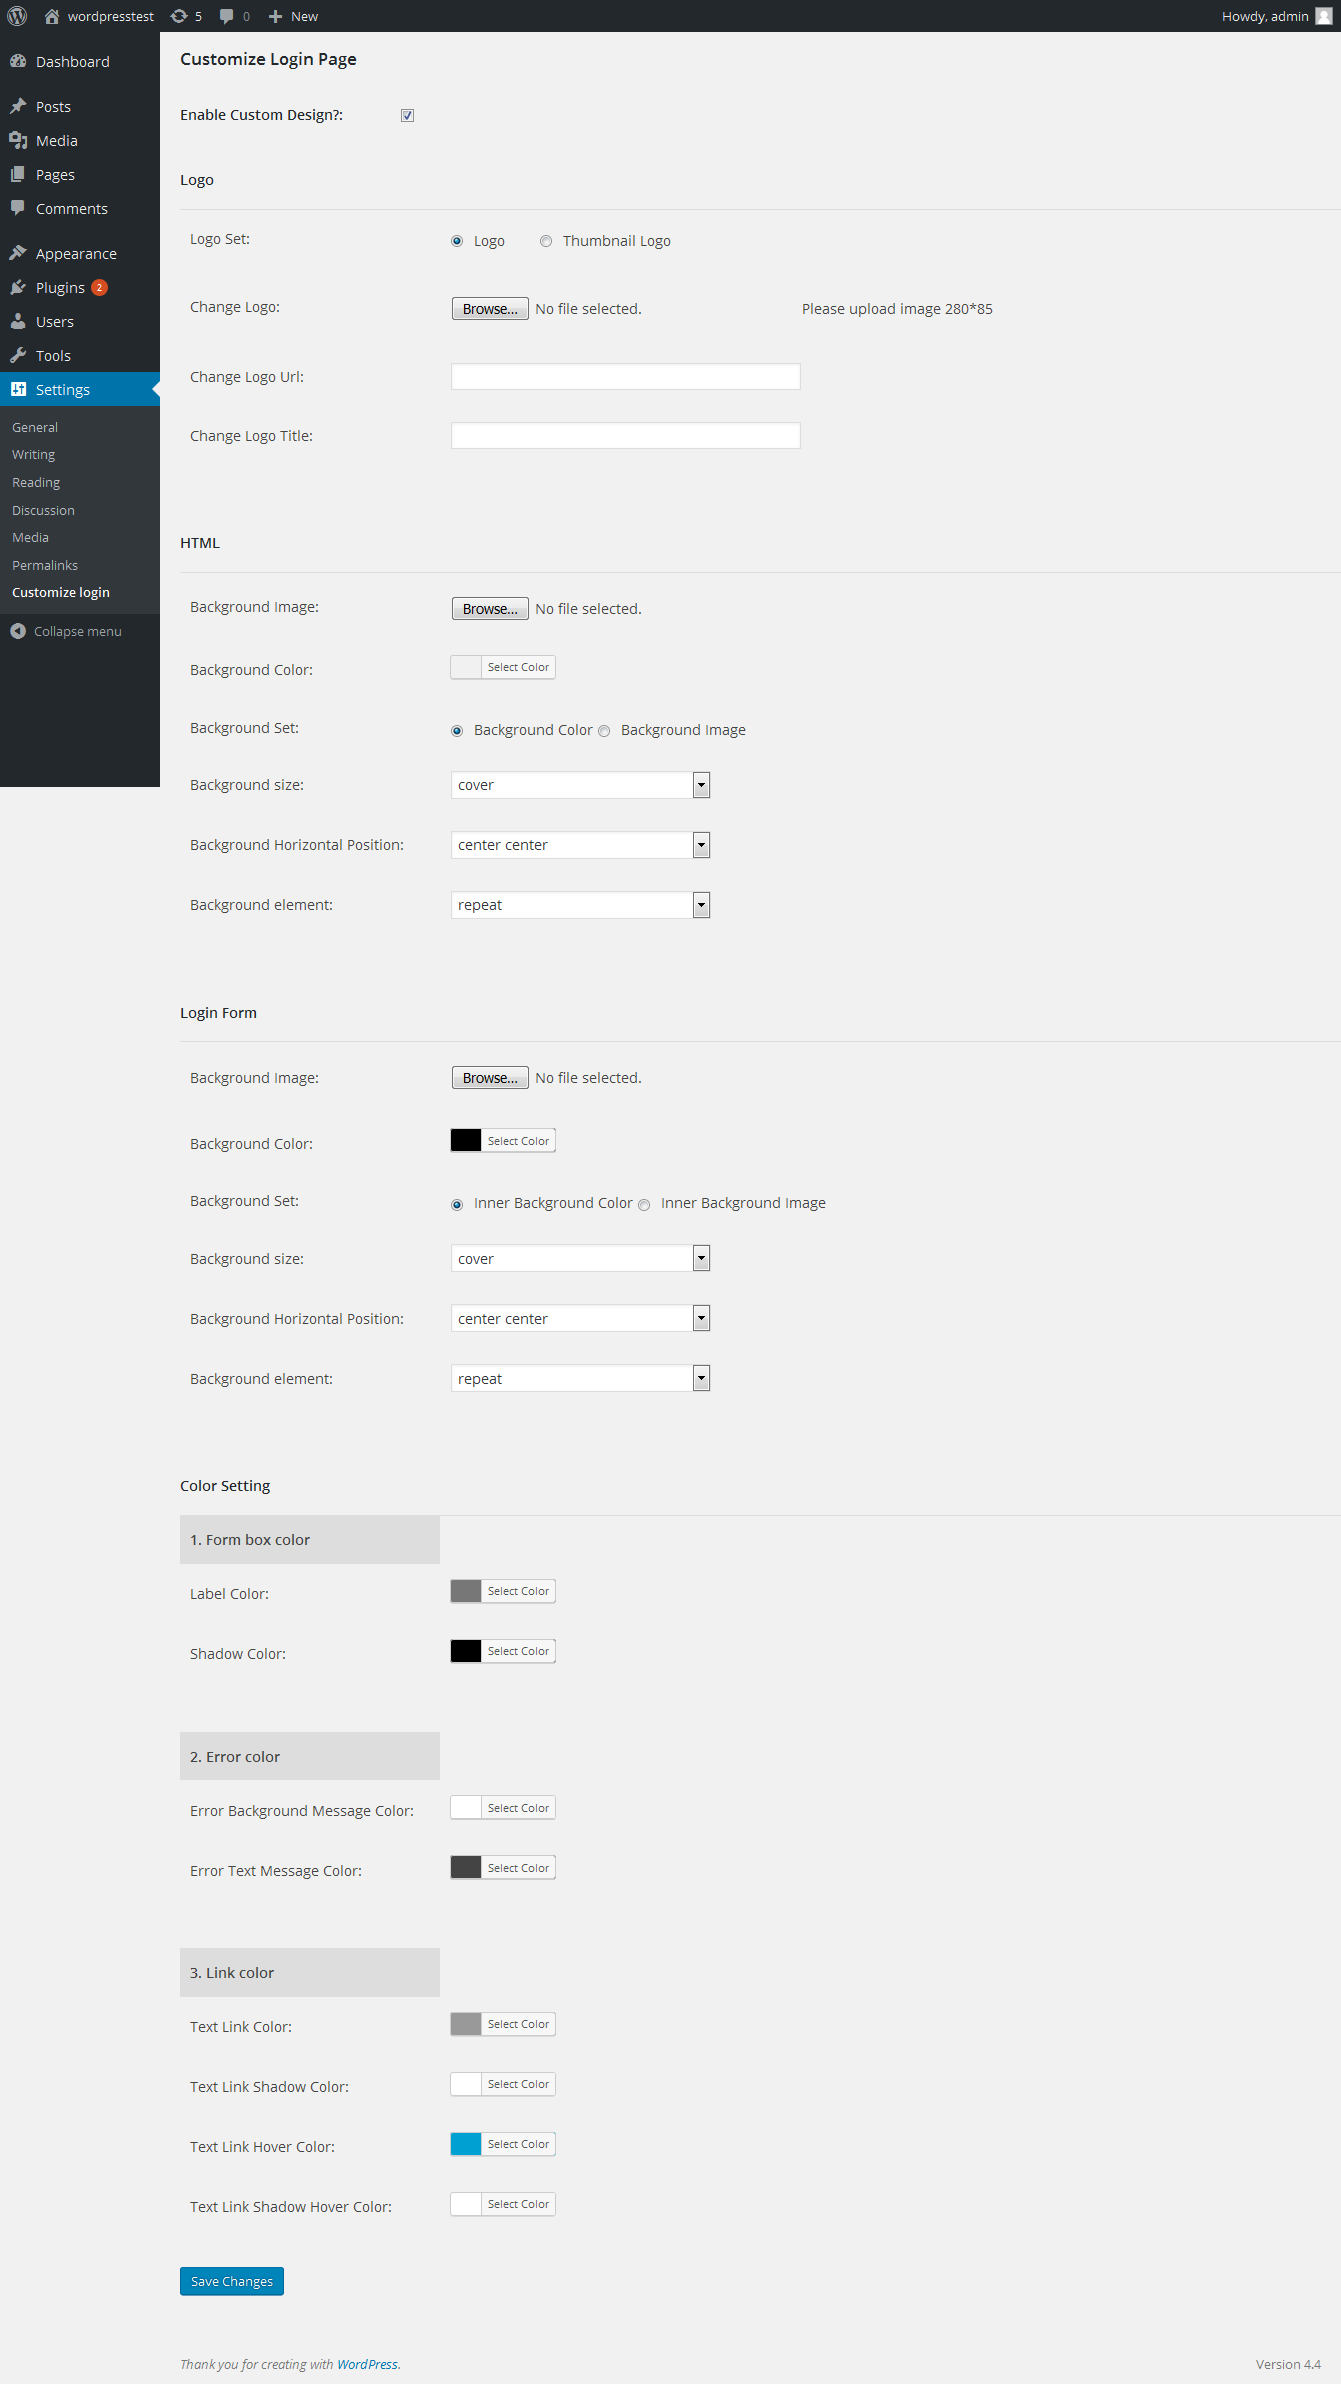 Default design set, enable custom design and save after you can see above frontend screen.